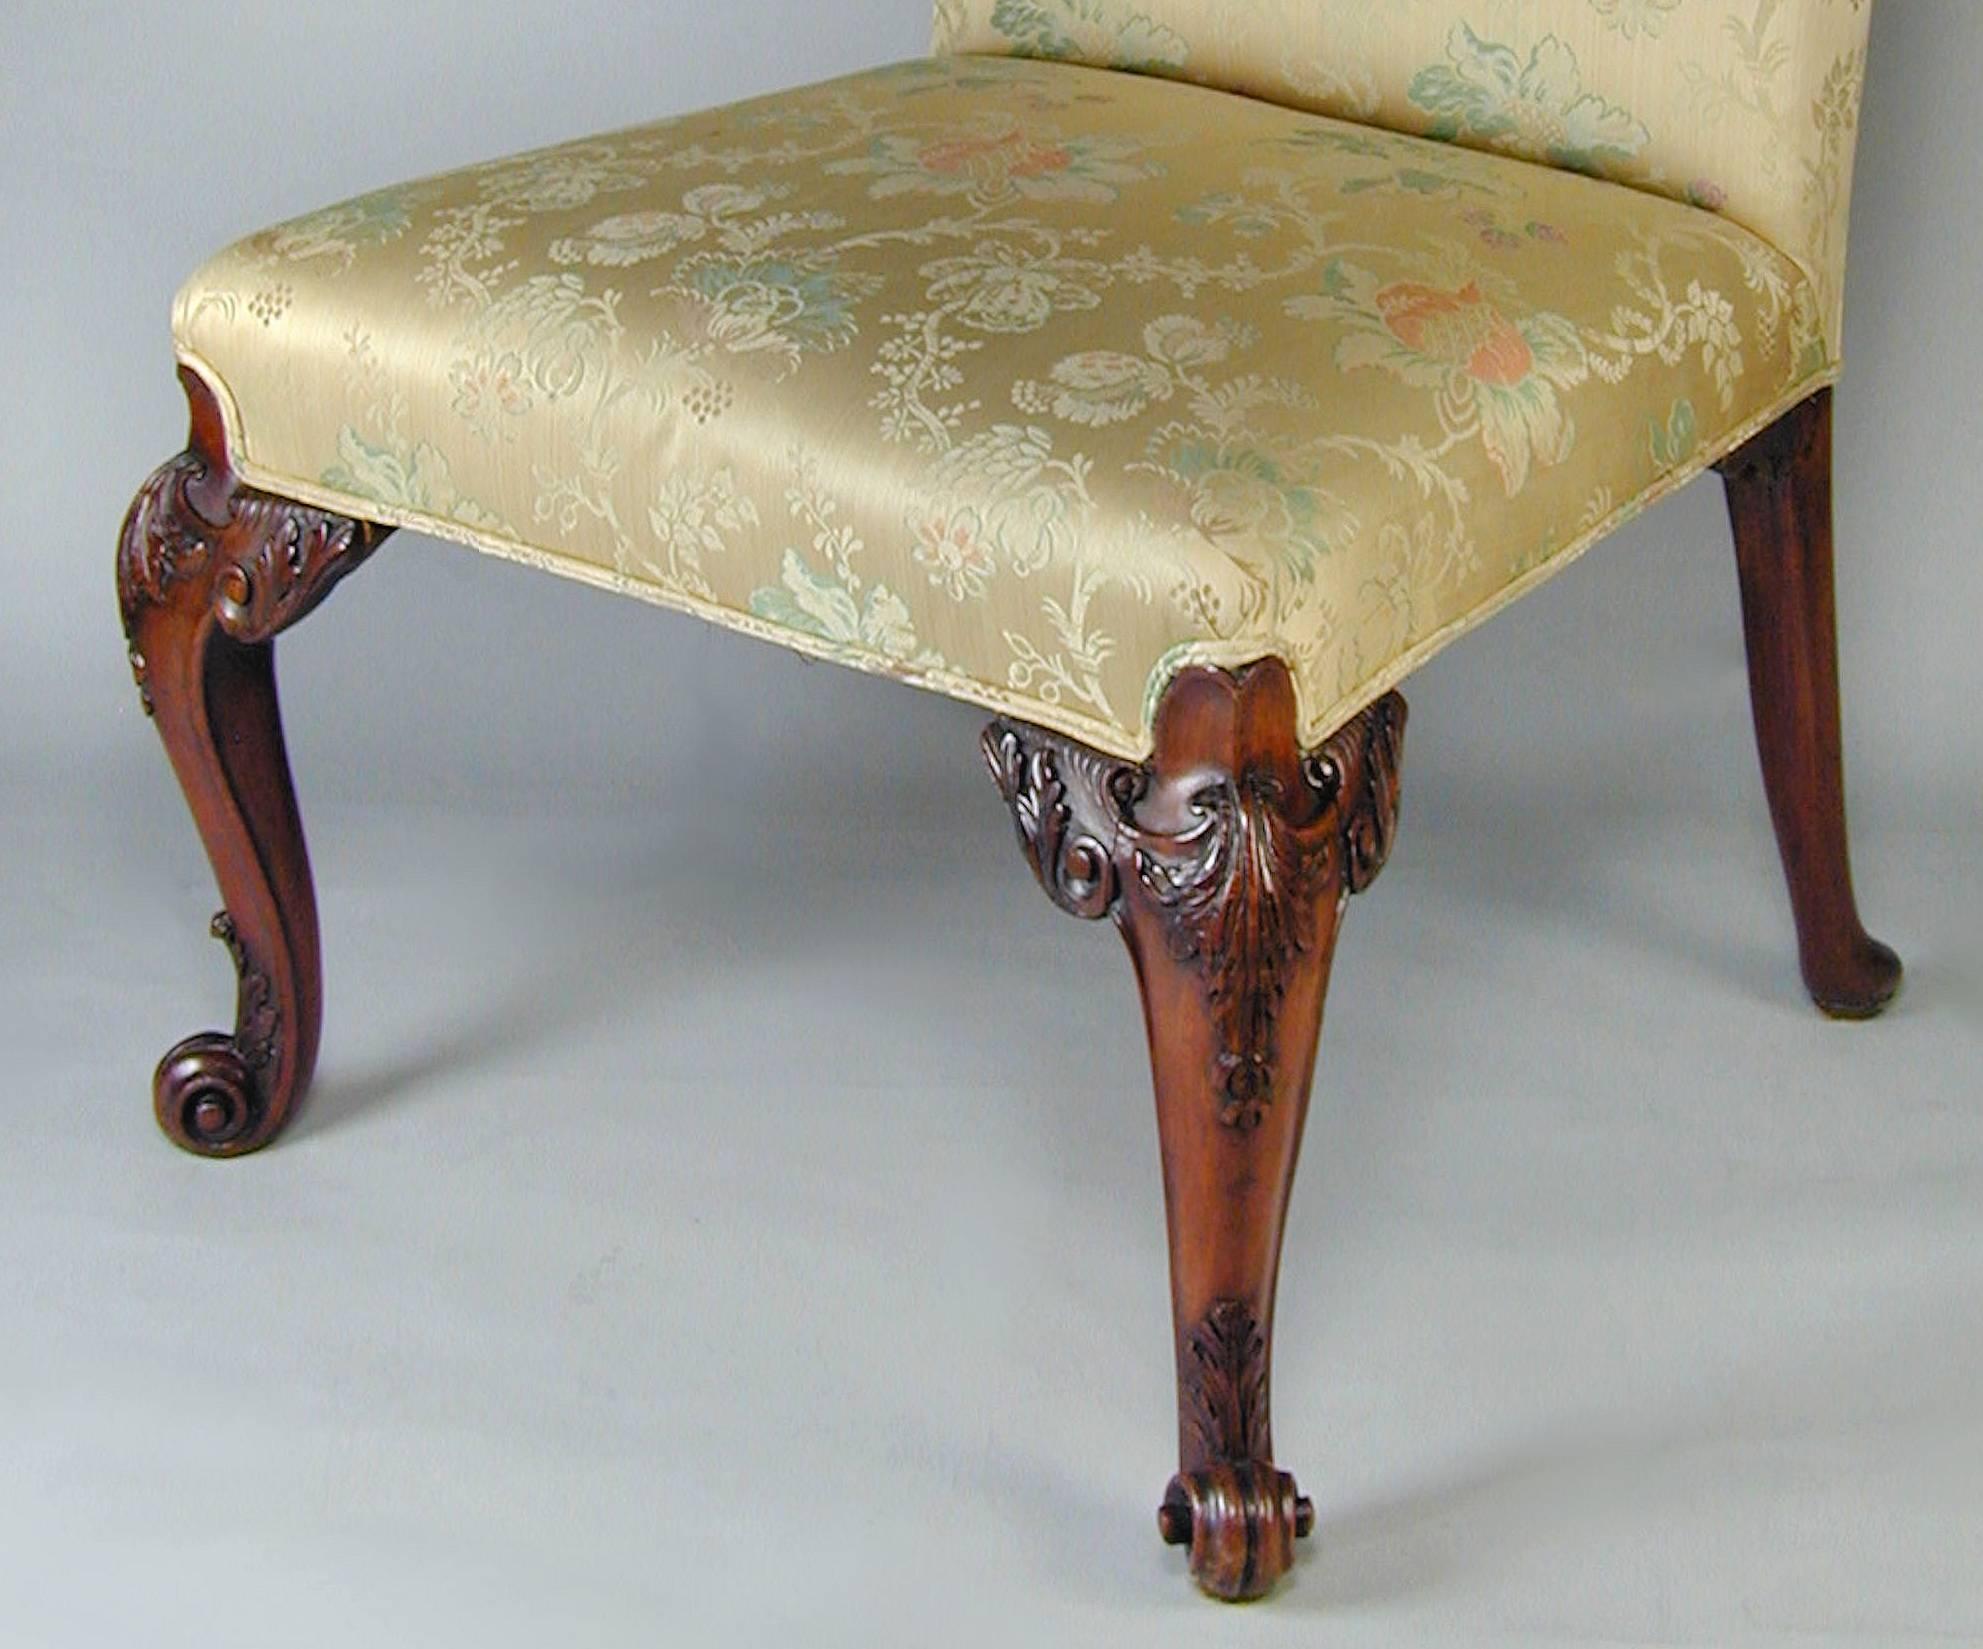 An exceptional pair of English mahogany carved side chairs on shaped cabriole legs ending in scroll feet, circa 1760. These pieces are currently located at our second location in London. We can ship these internationally. 